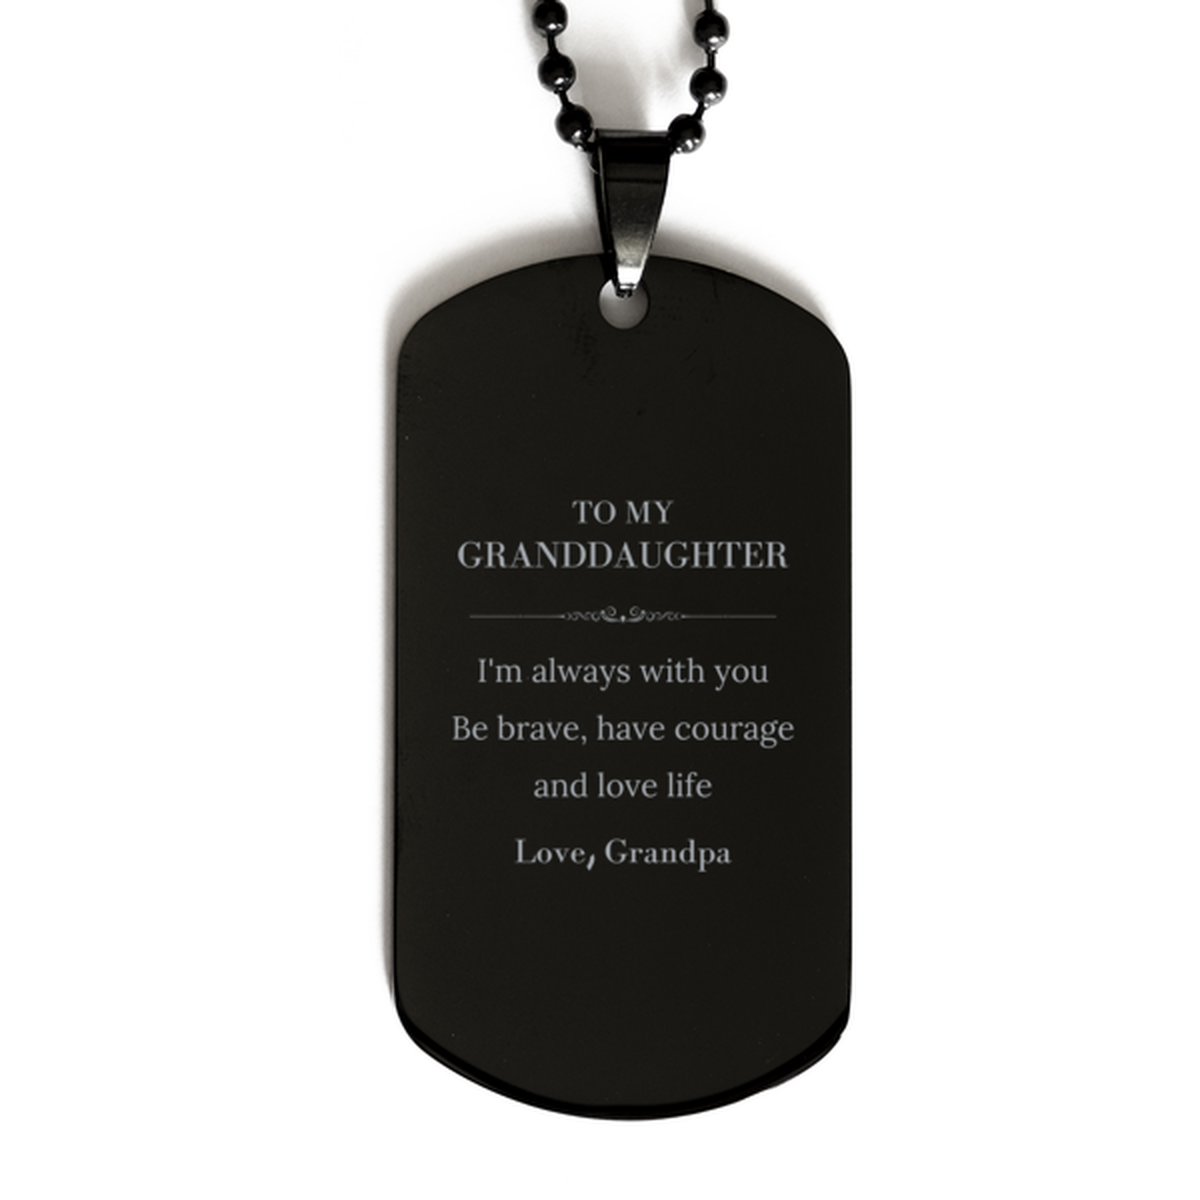 To My Granddaughter Gifts from Grandpa, Unique Black Dog Tag Inspirational Christmas Birthday Graduation Gifts for Granddaughter I'm always with you. Be brave, have courage and love life. Love, Grandpa